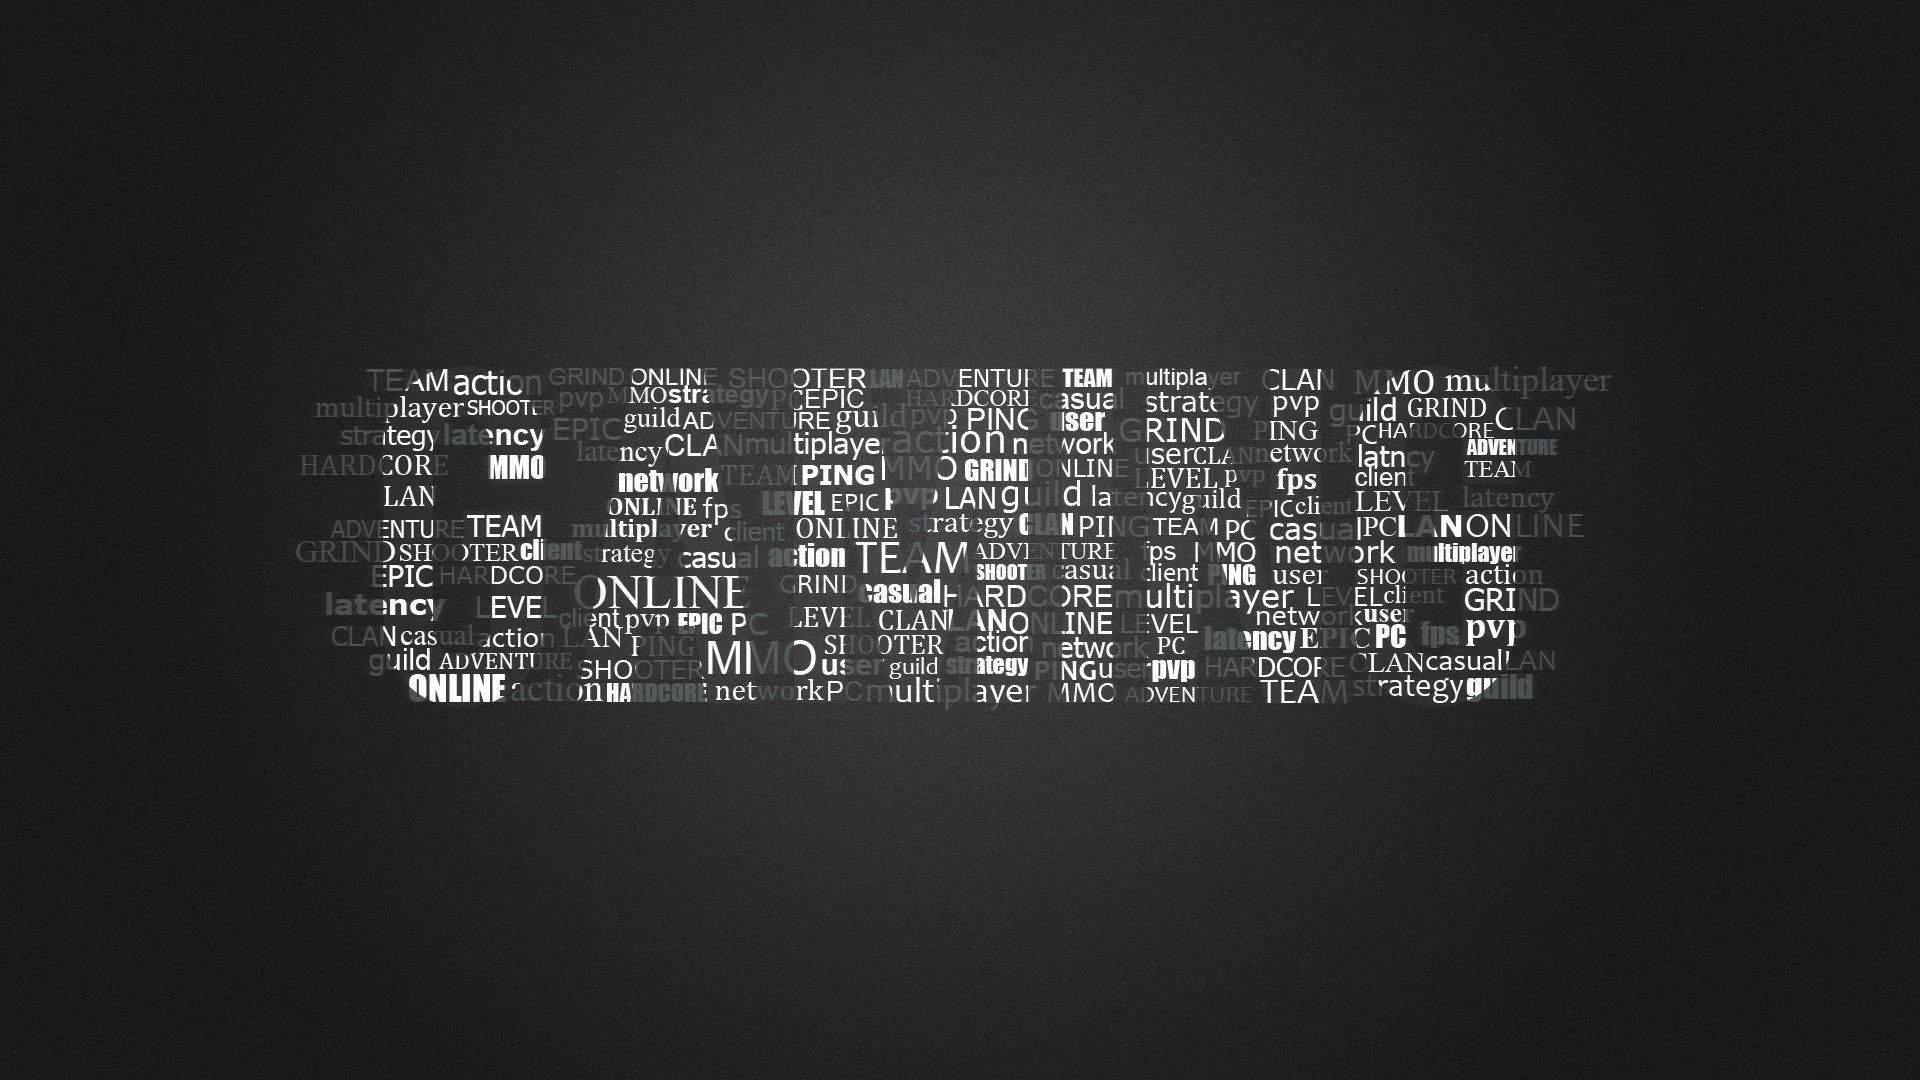 1920x1080 gaming logo wallpapers free download cool images 4k amazing pictures mac  desktop images widescreen 1080p digital photos 1920Ã1080 Wallpaper HD